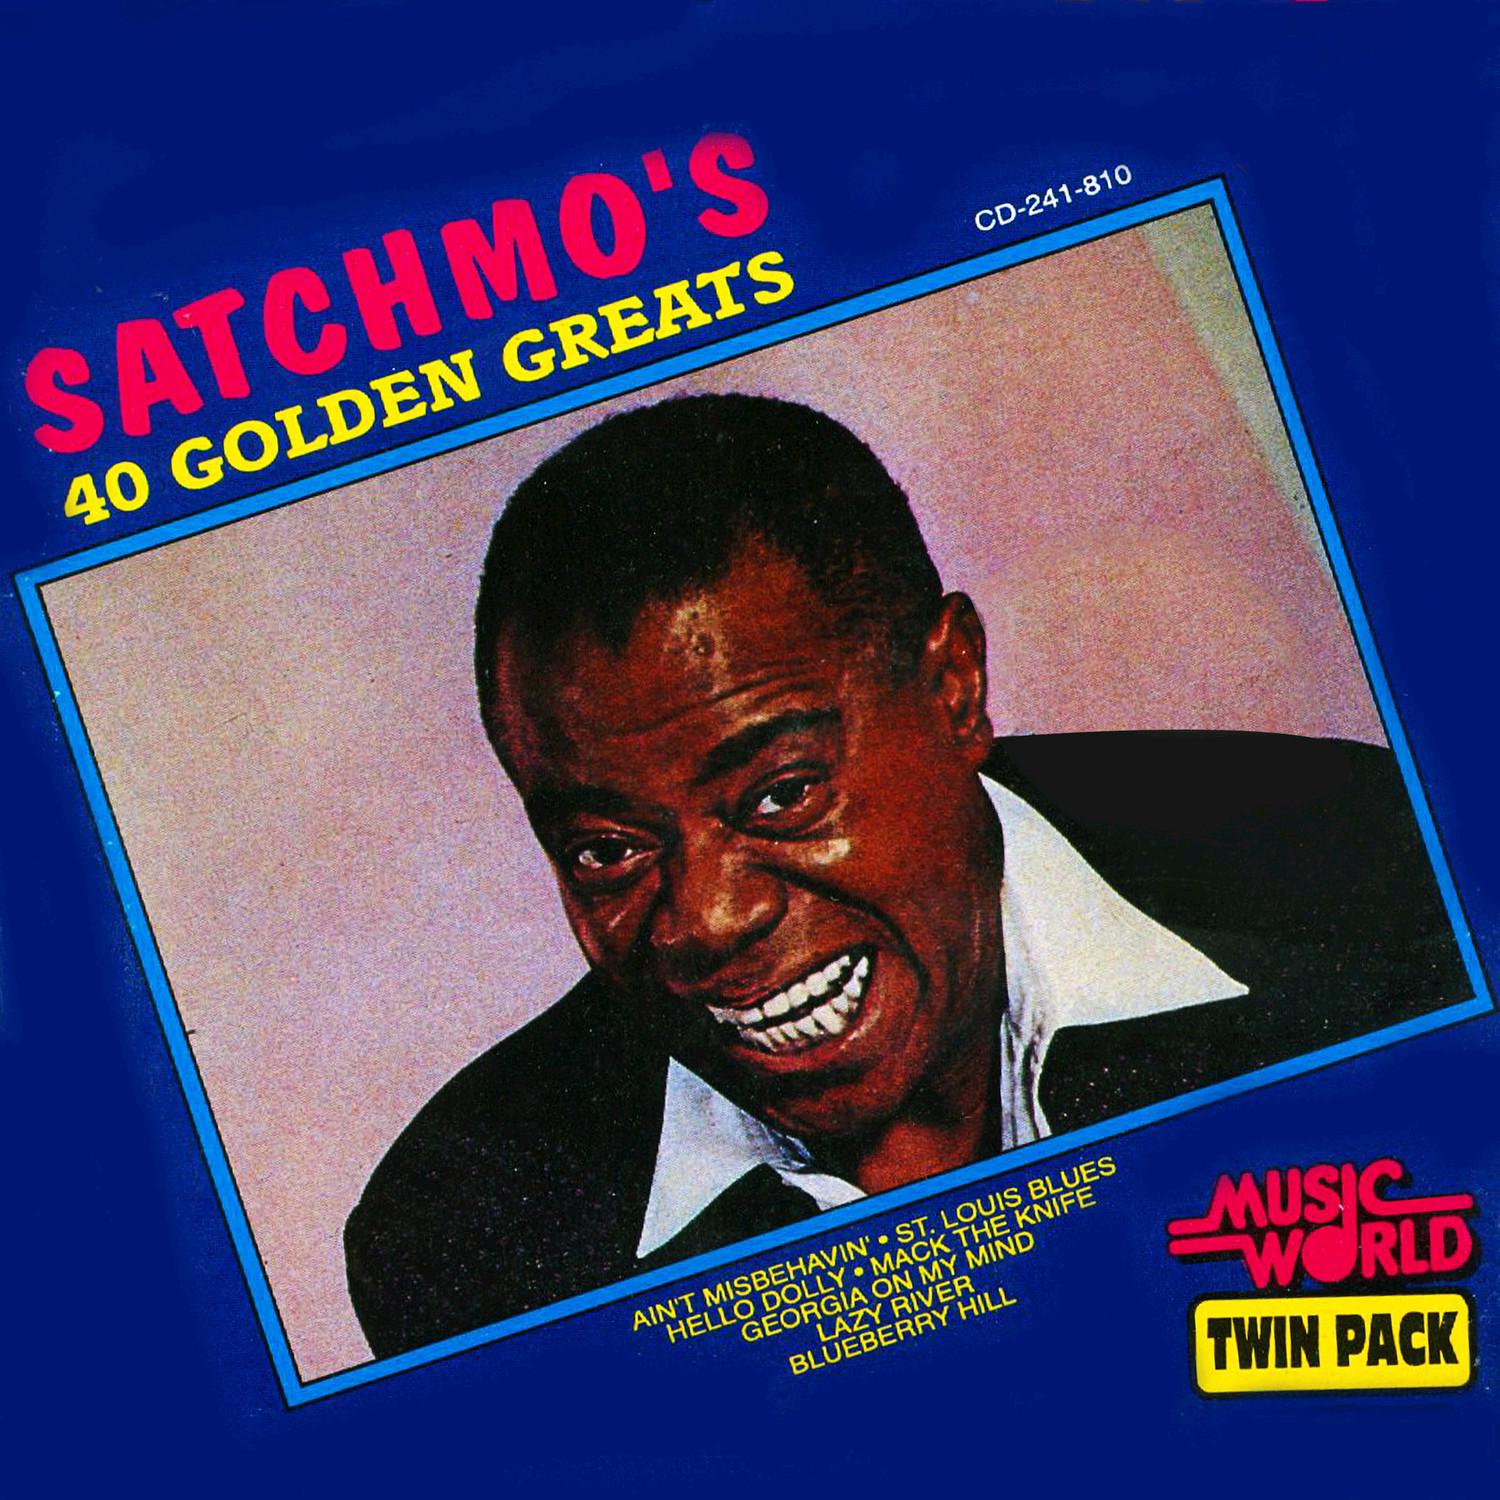 Satchmo's - 40 Golden Greats